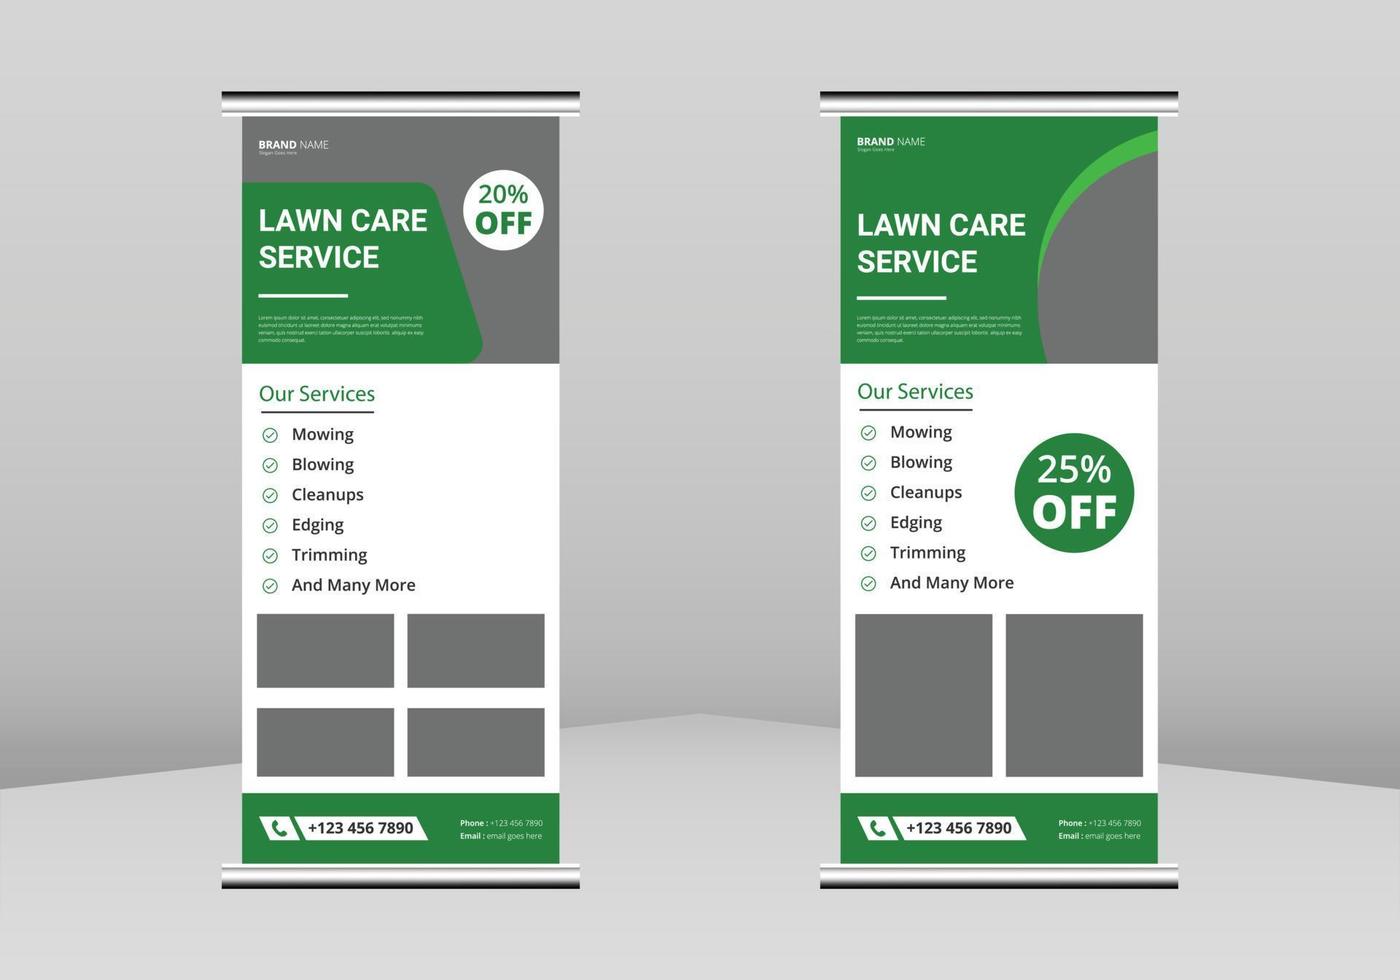 Lawn and gardening service Roll up Banner Design, Tree and gardening service poster leaflet Roll up leaflet template. lawnmower flyer poster DL Flyer, Trend Business Roll Up Banner Design vector